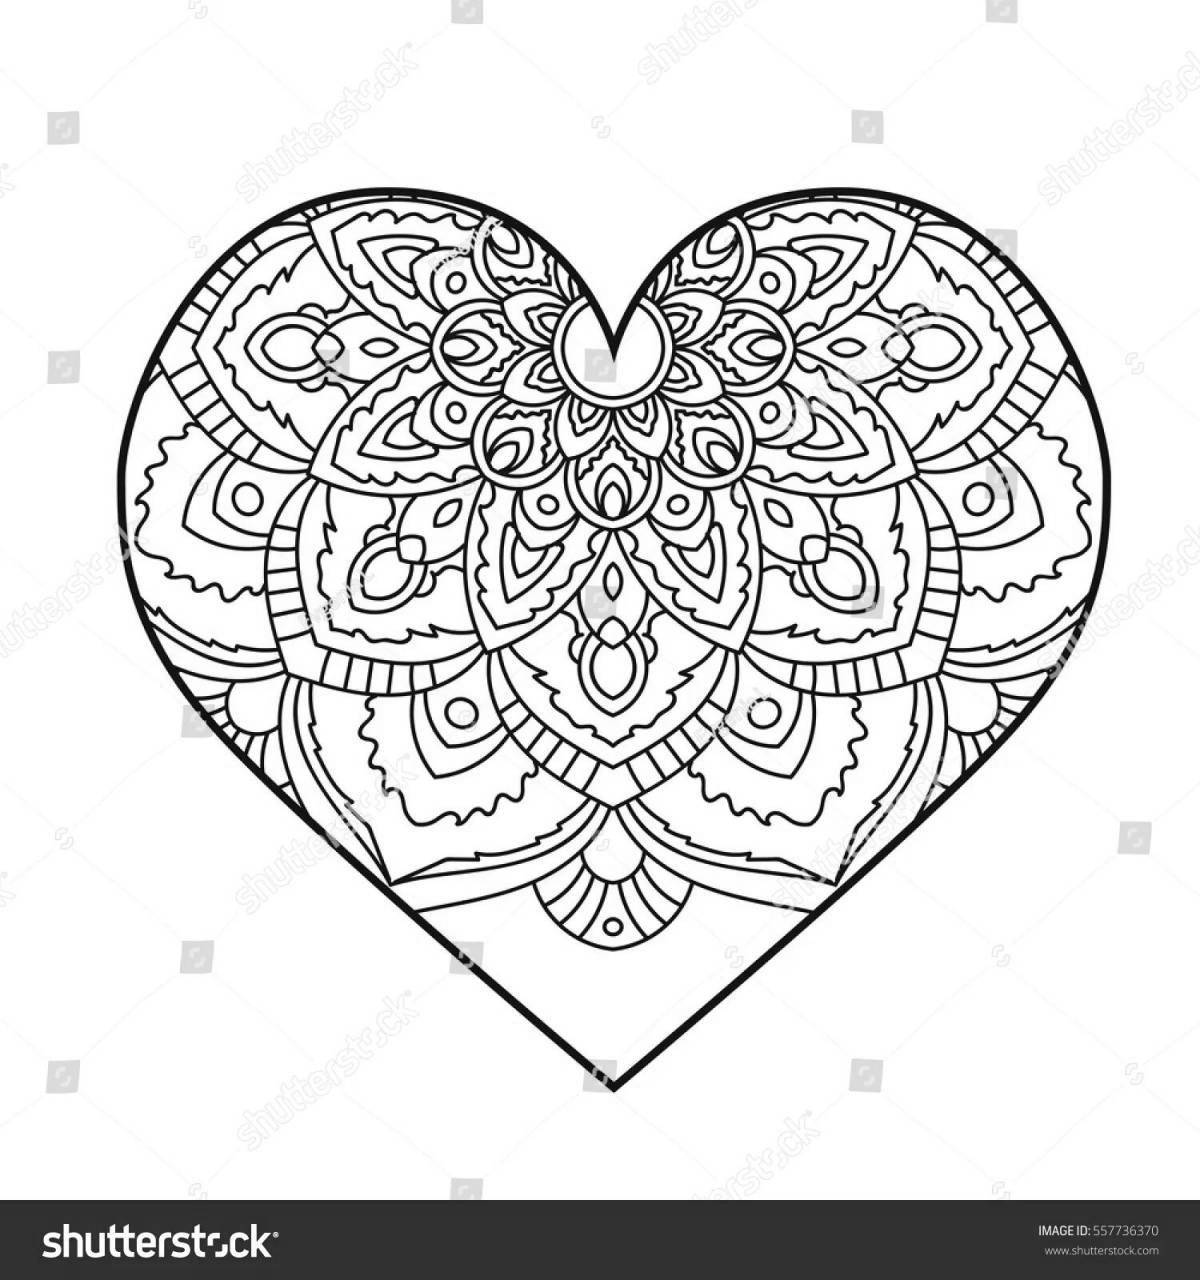 Blissful heart coloring page